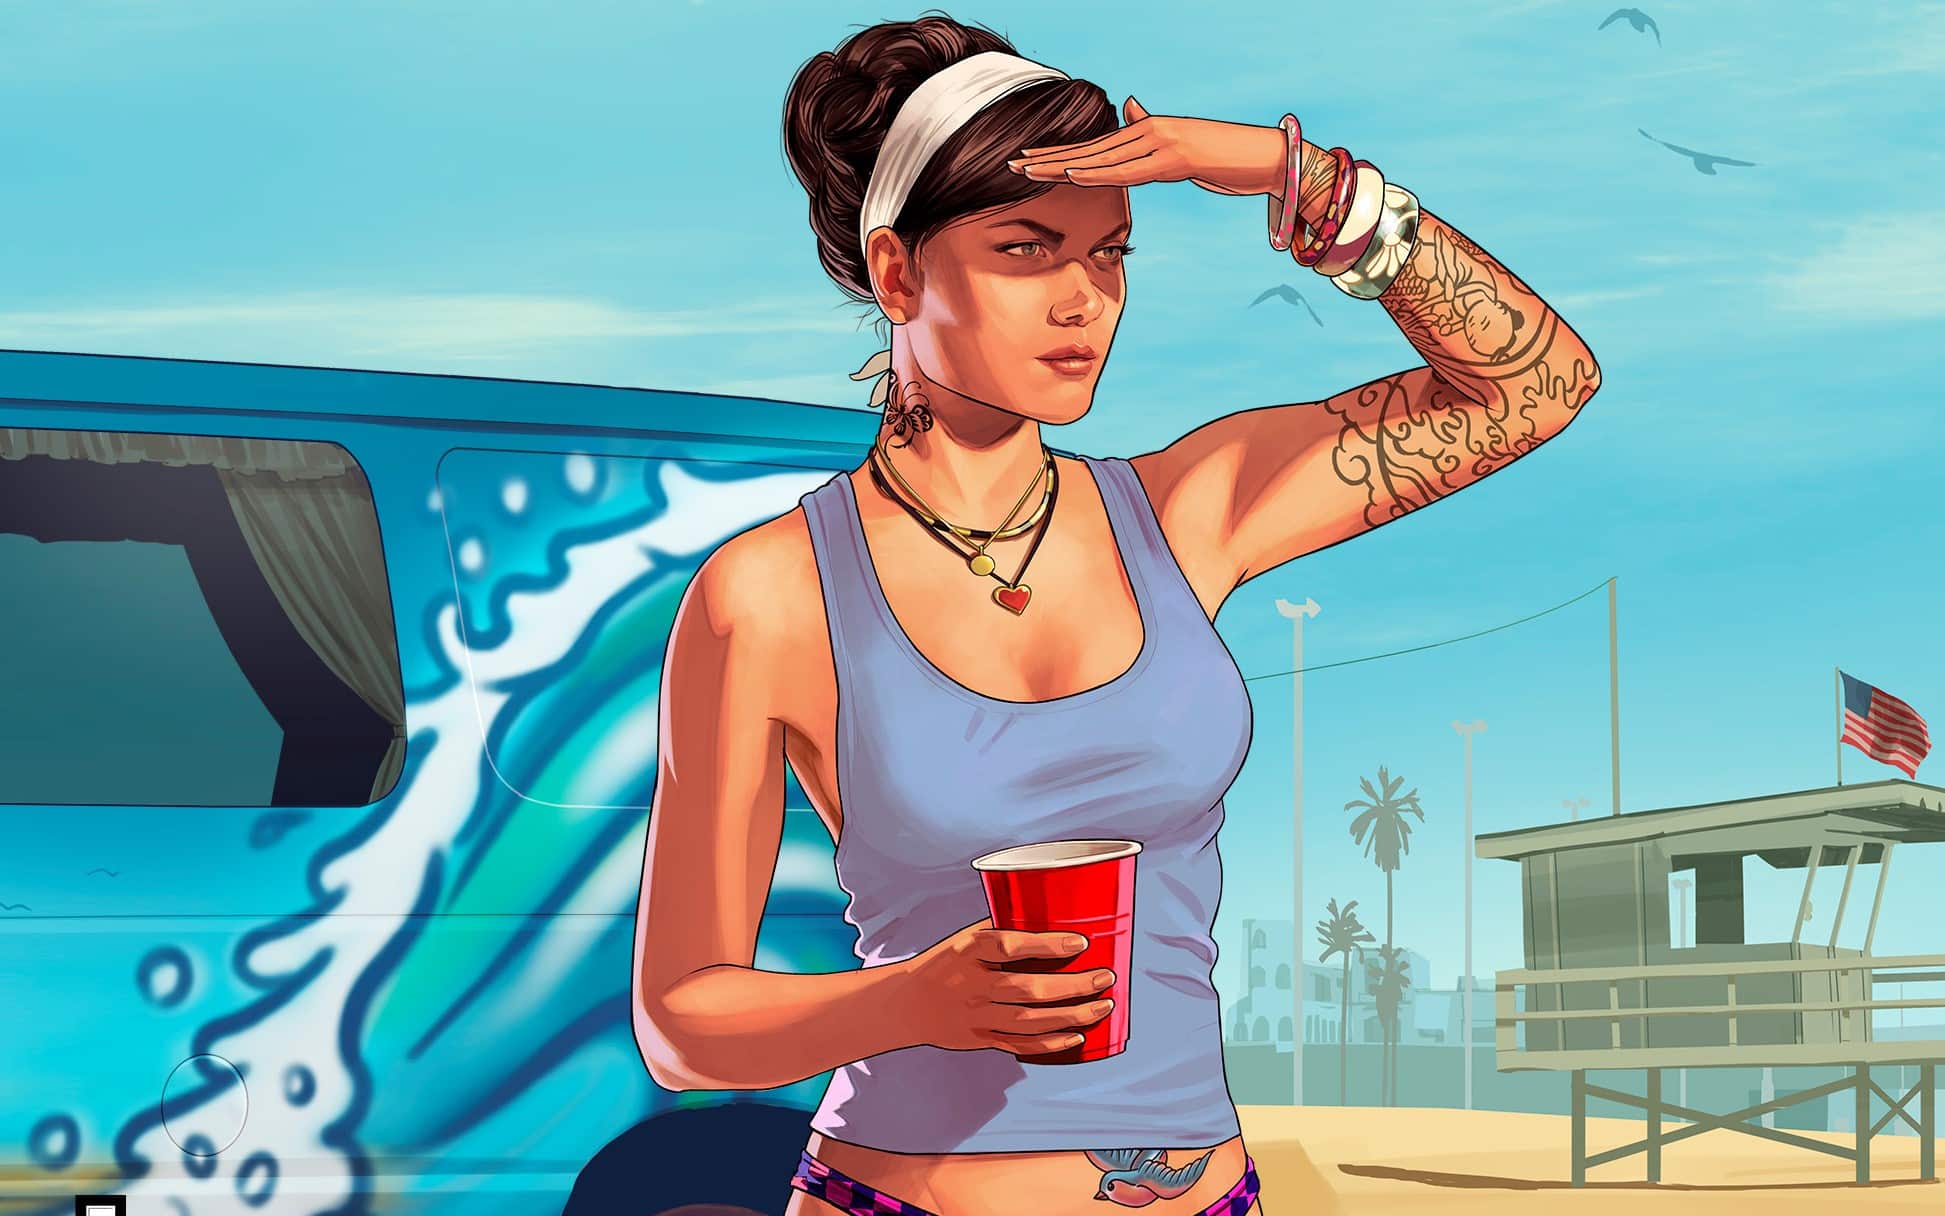 GTA 6: Everything We Know, From Leaks To News